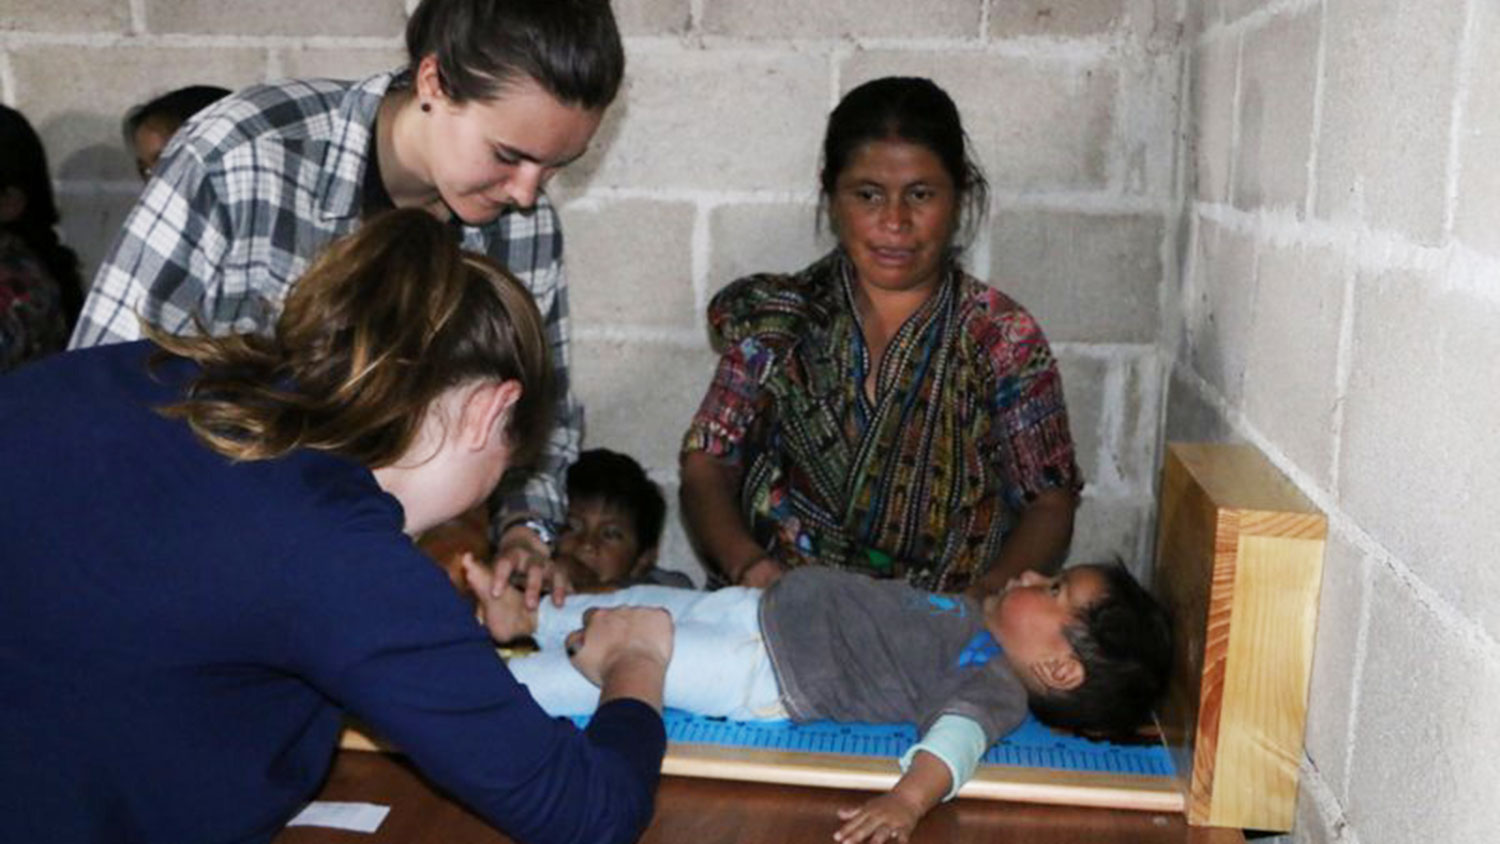 CALS student Kati Scruggs assisting with a child's medical exam in Guatemala